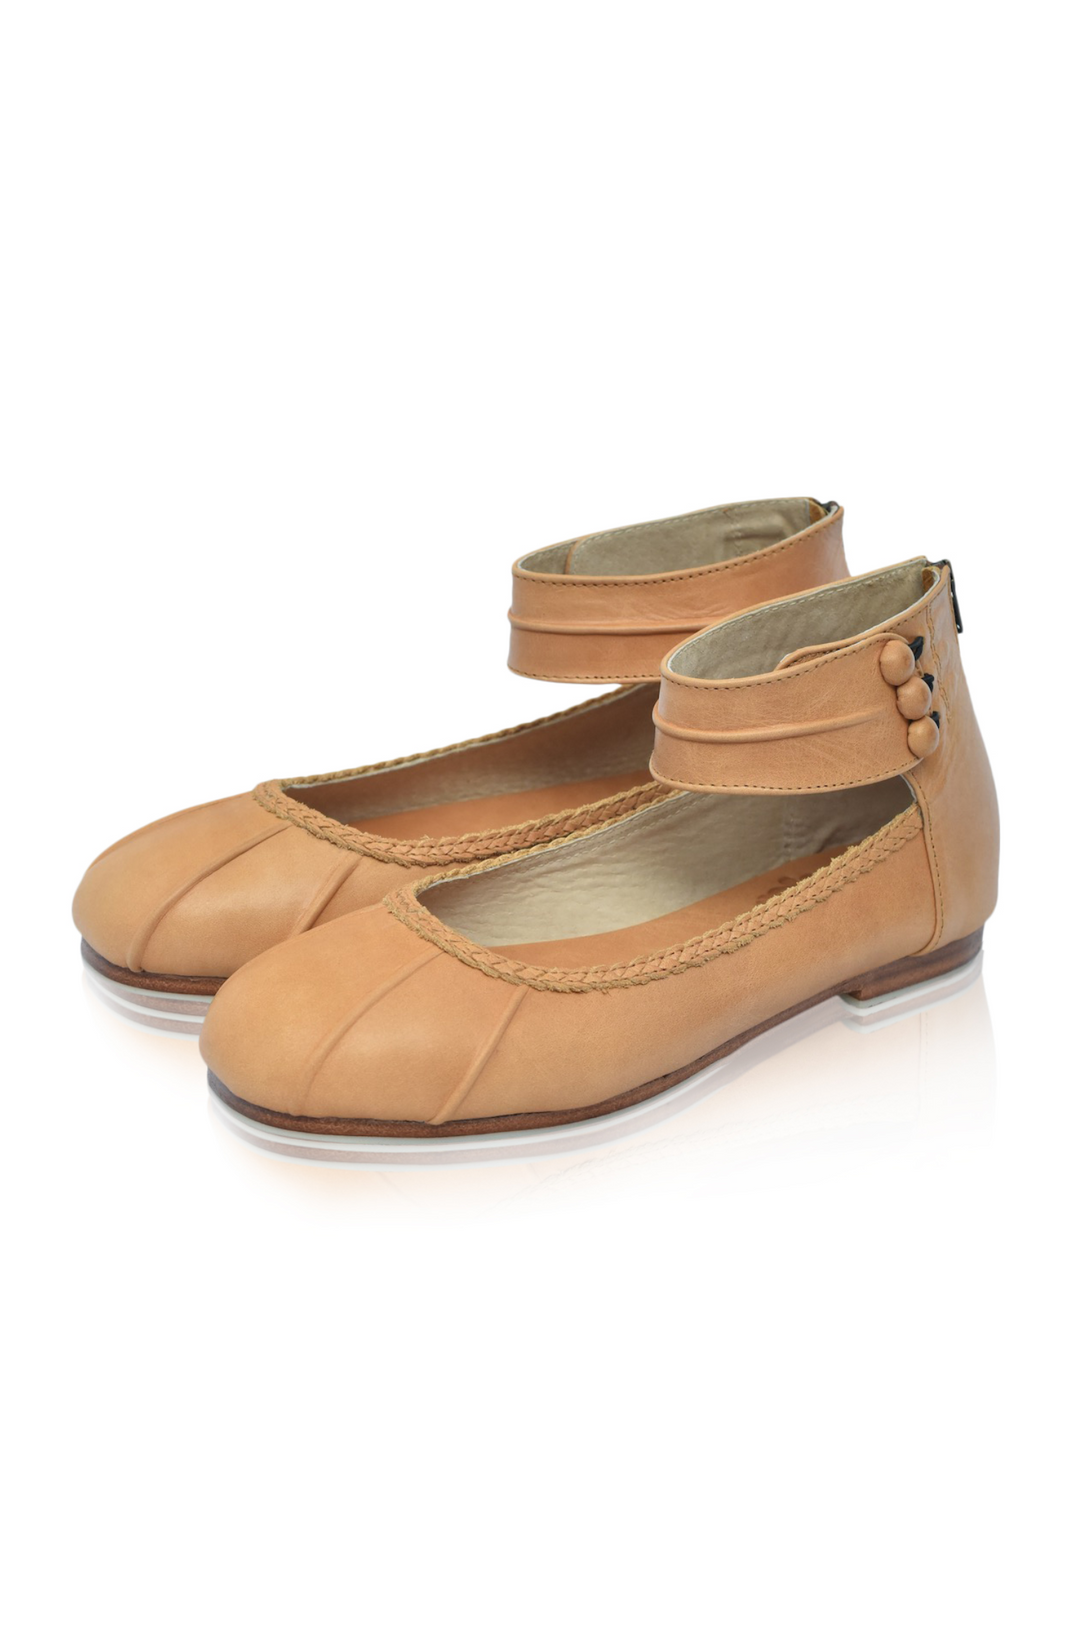 Muse Ballet Flat by ELF